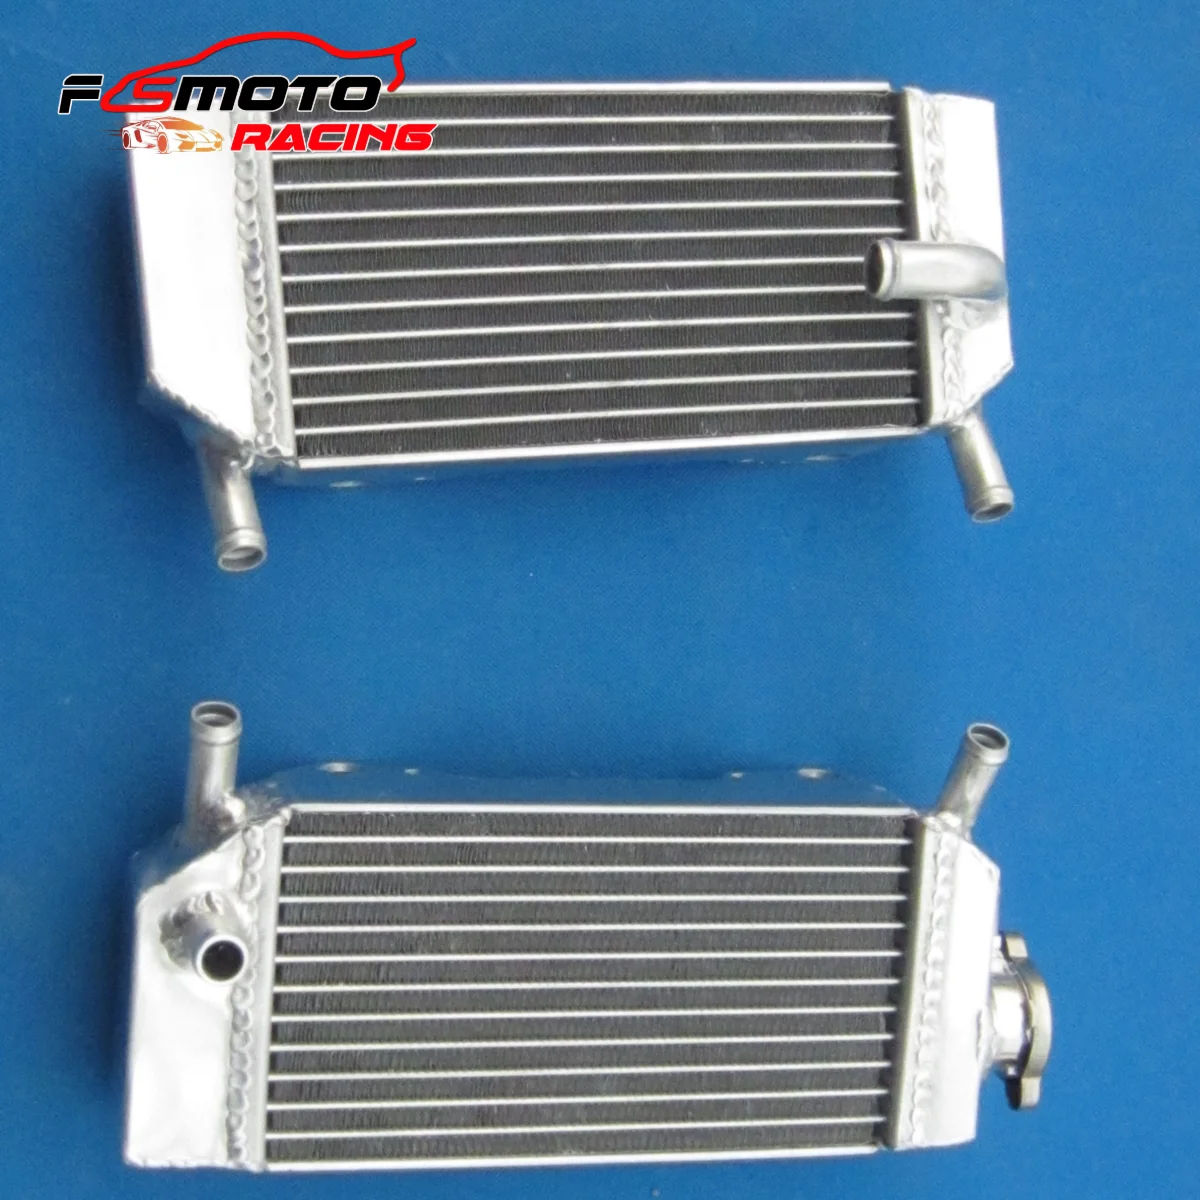 

Motorcycle Performance Aluminum Radiator Water Tank Cooling For HONDA CRF250R CRF250X CRF 250R 250X 250 R X 2004-2009 2005 2006